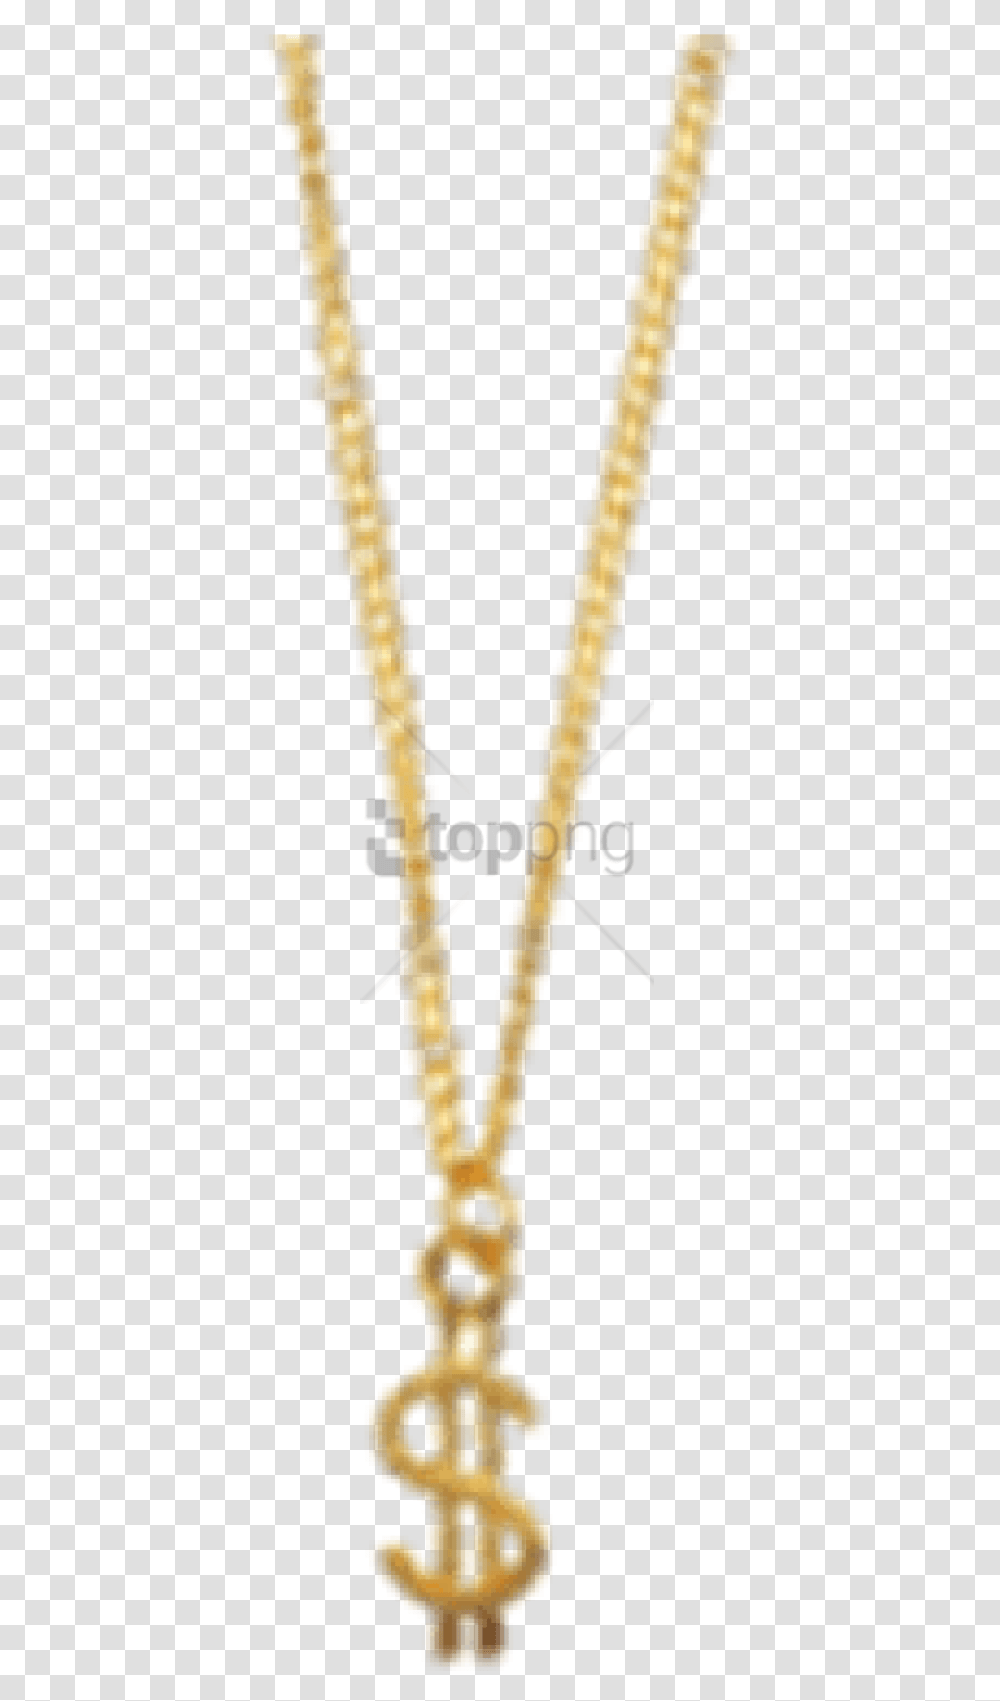 Gold Dollar Symbol Chain Background, Leisure Activities, Musical Instrument, Arrow, Saxophone Transparent Png